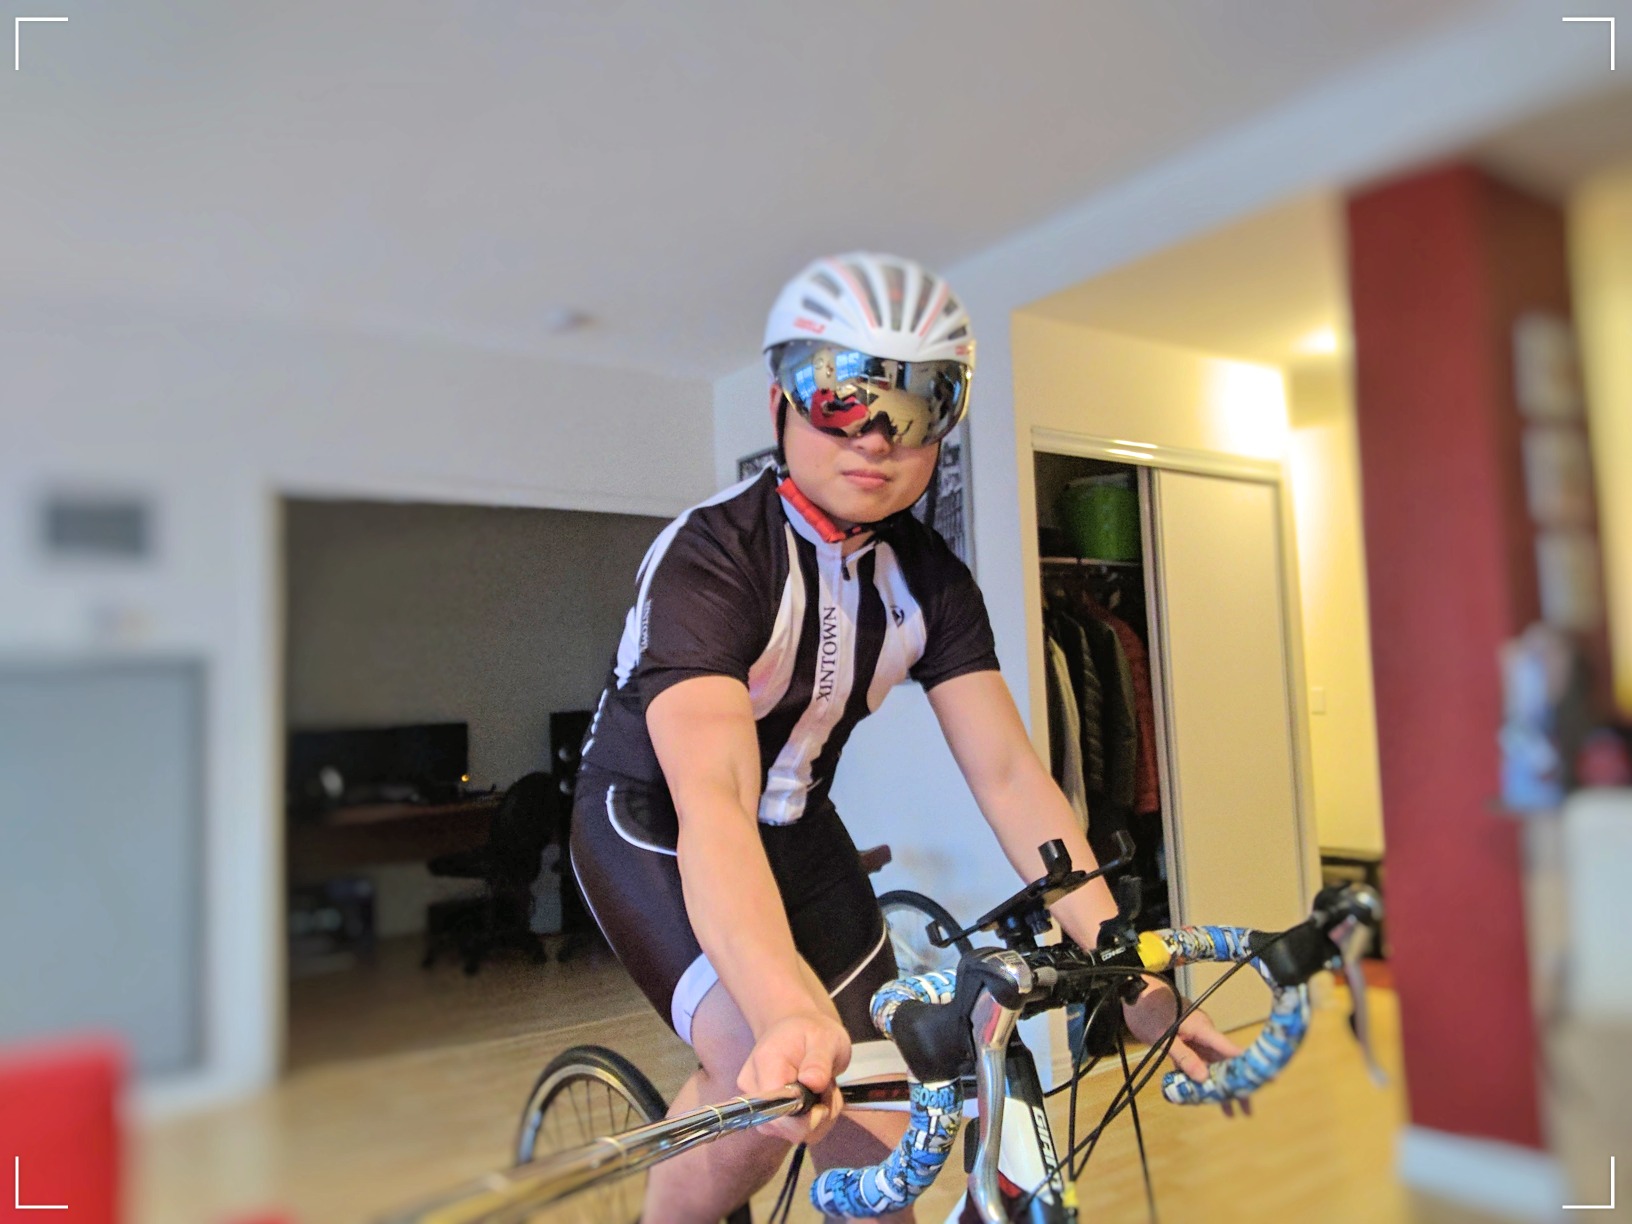 (It wasn’t sunny outside, hence I am inside… the helmet improves the airflow…)